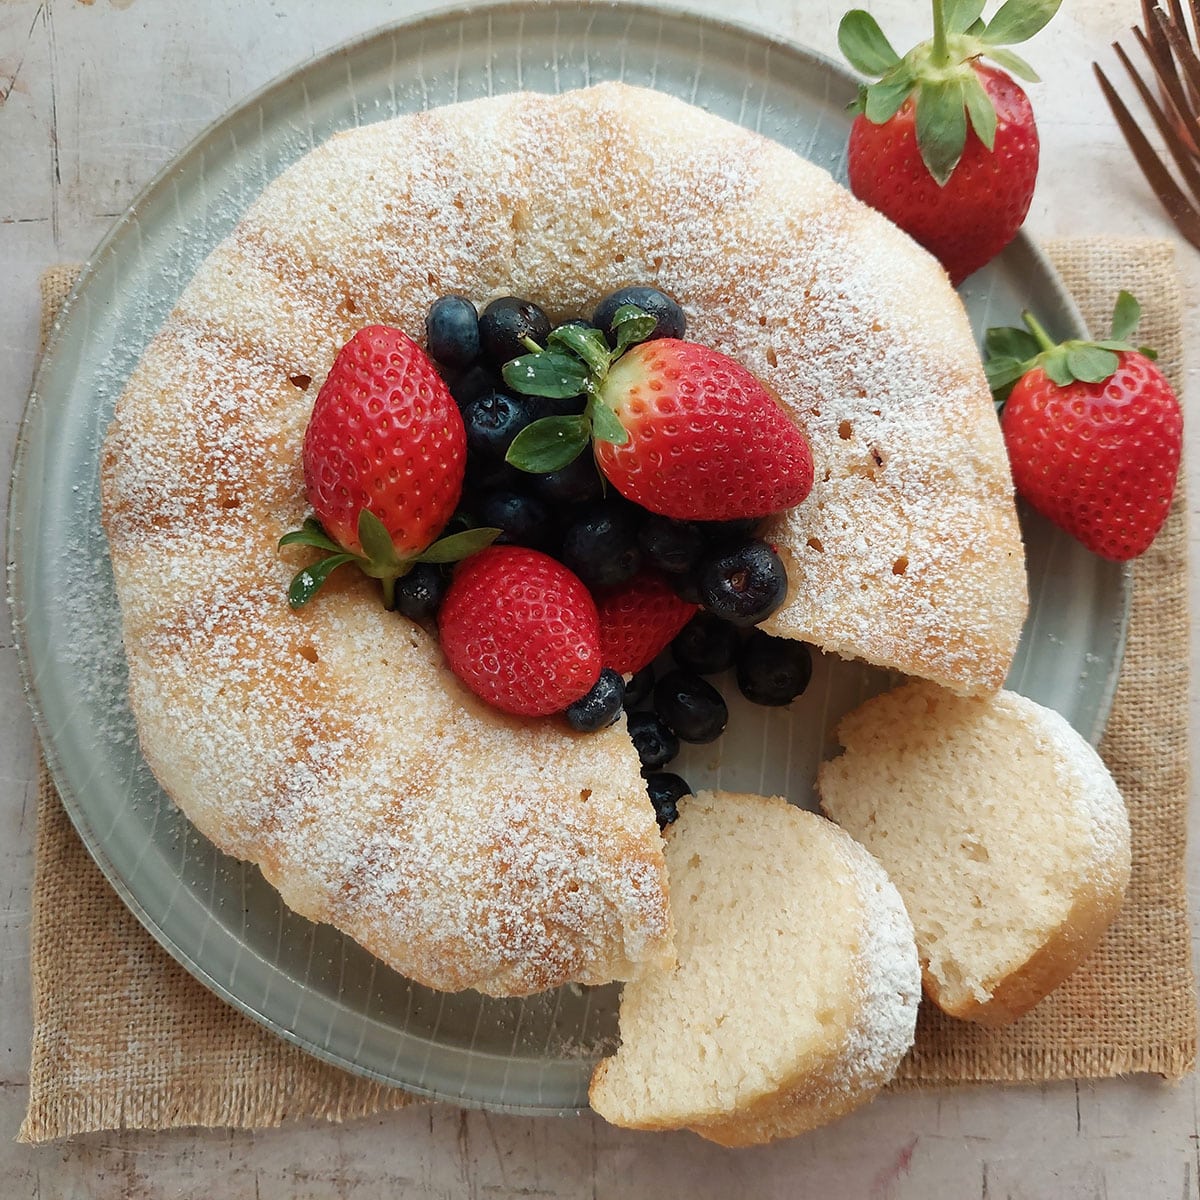 simply enjoy with a sprinkle of powdered sugar, topped with seasonal fruit and berries.